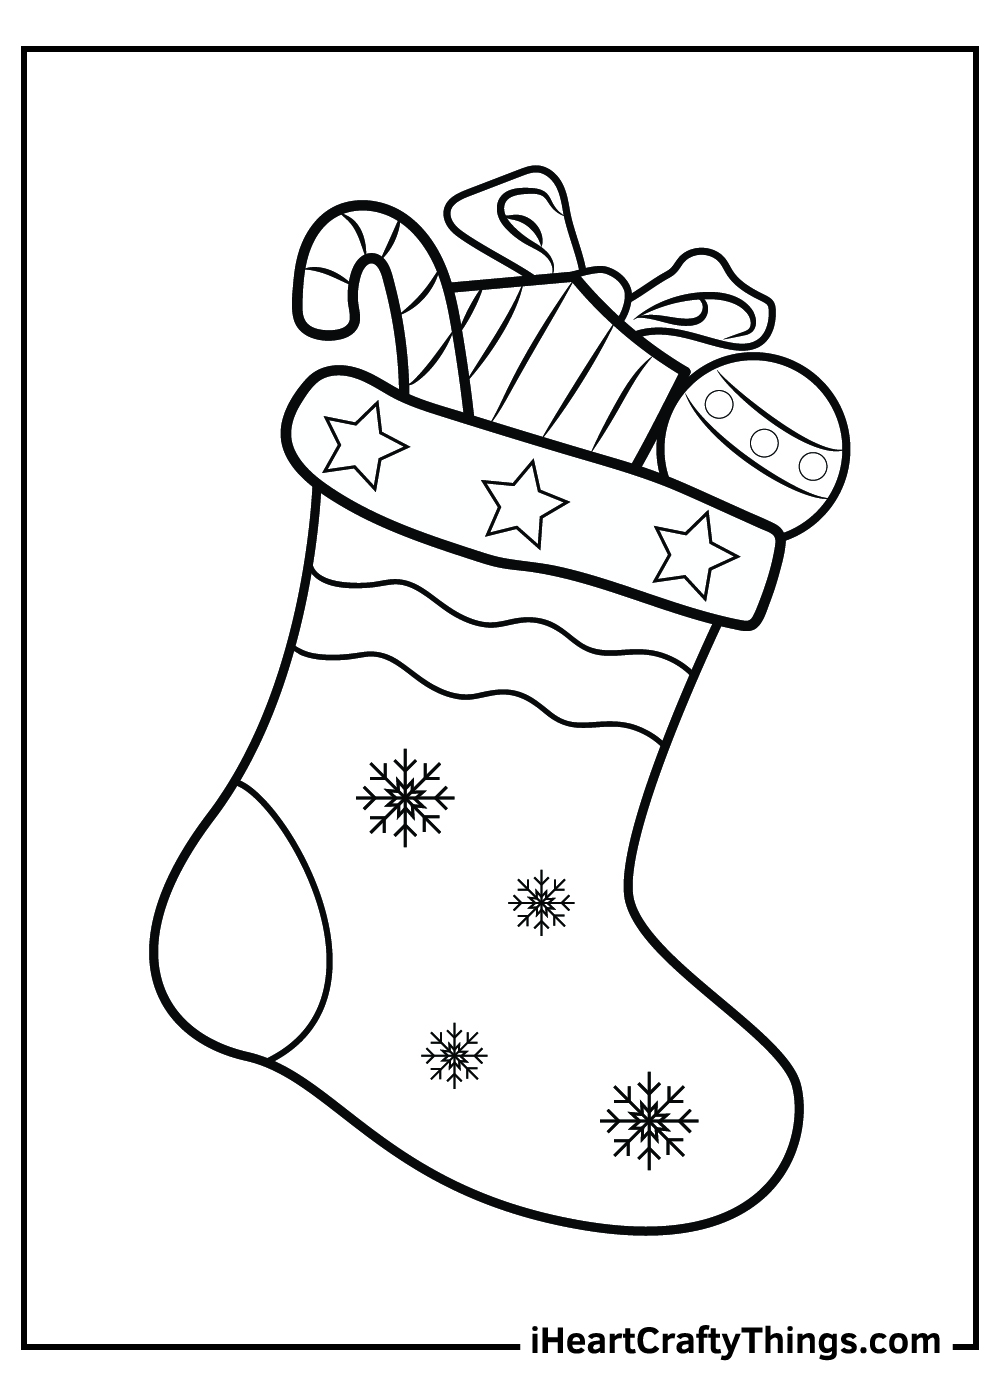 Printable Christmas Stocking Coloring Pages (Updated 2021)